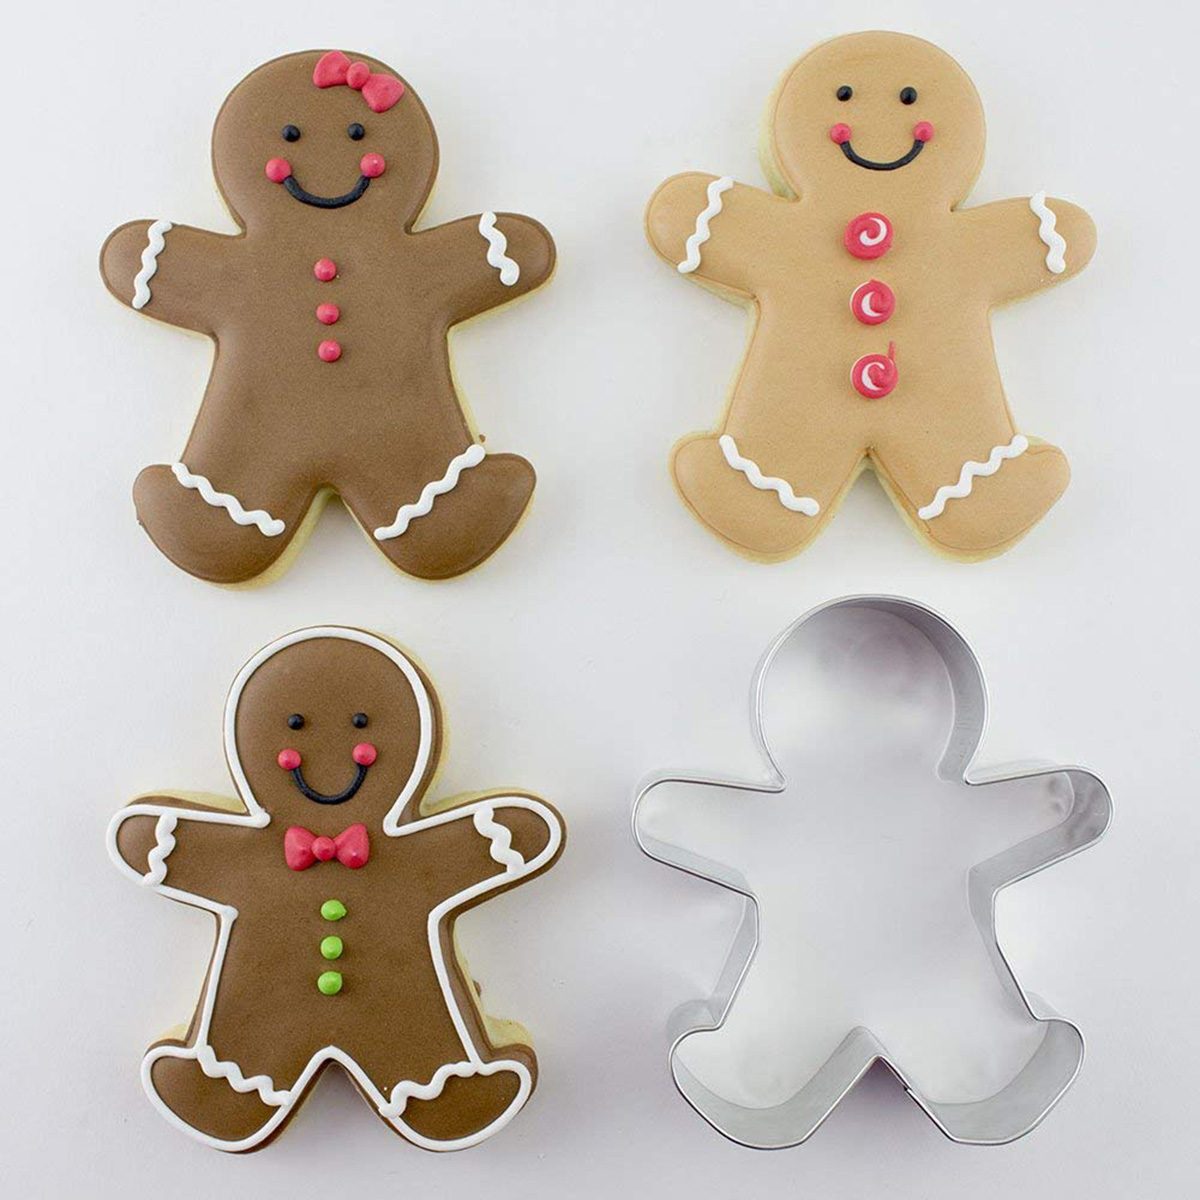 cookie decorating supplies, where to find the best supplies